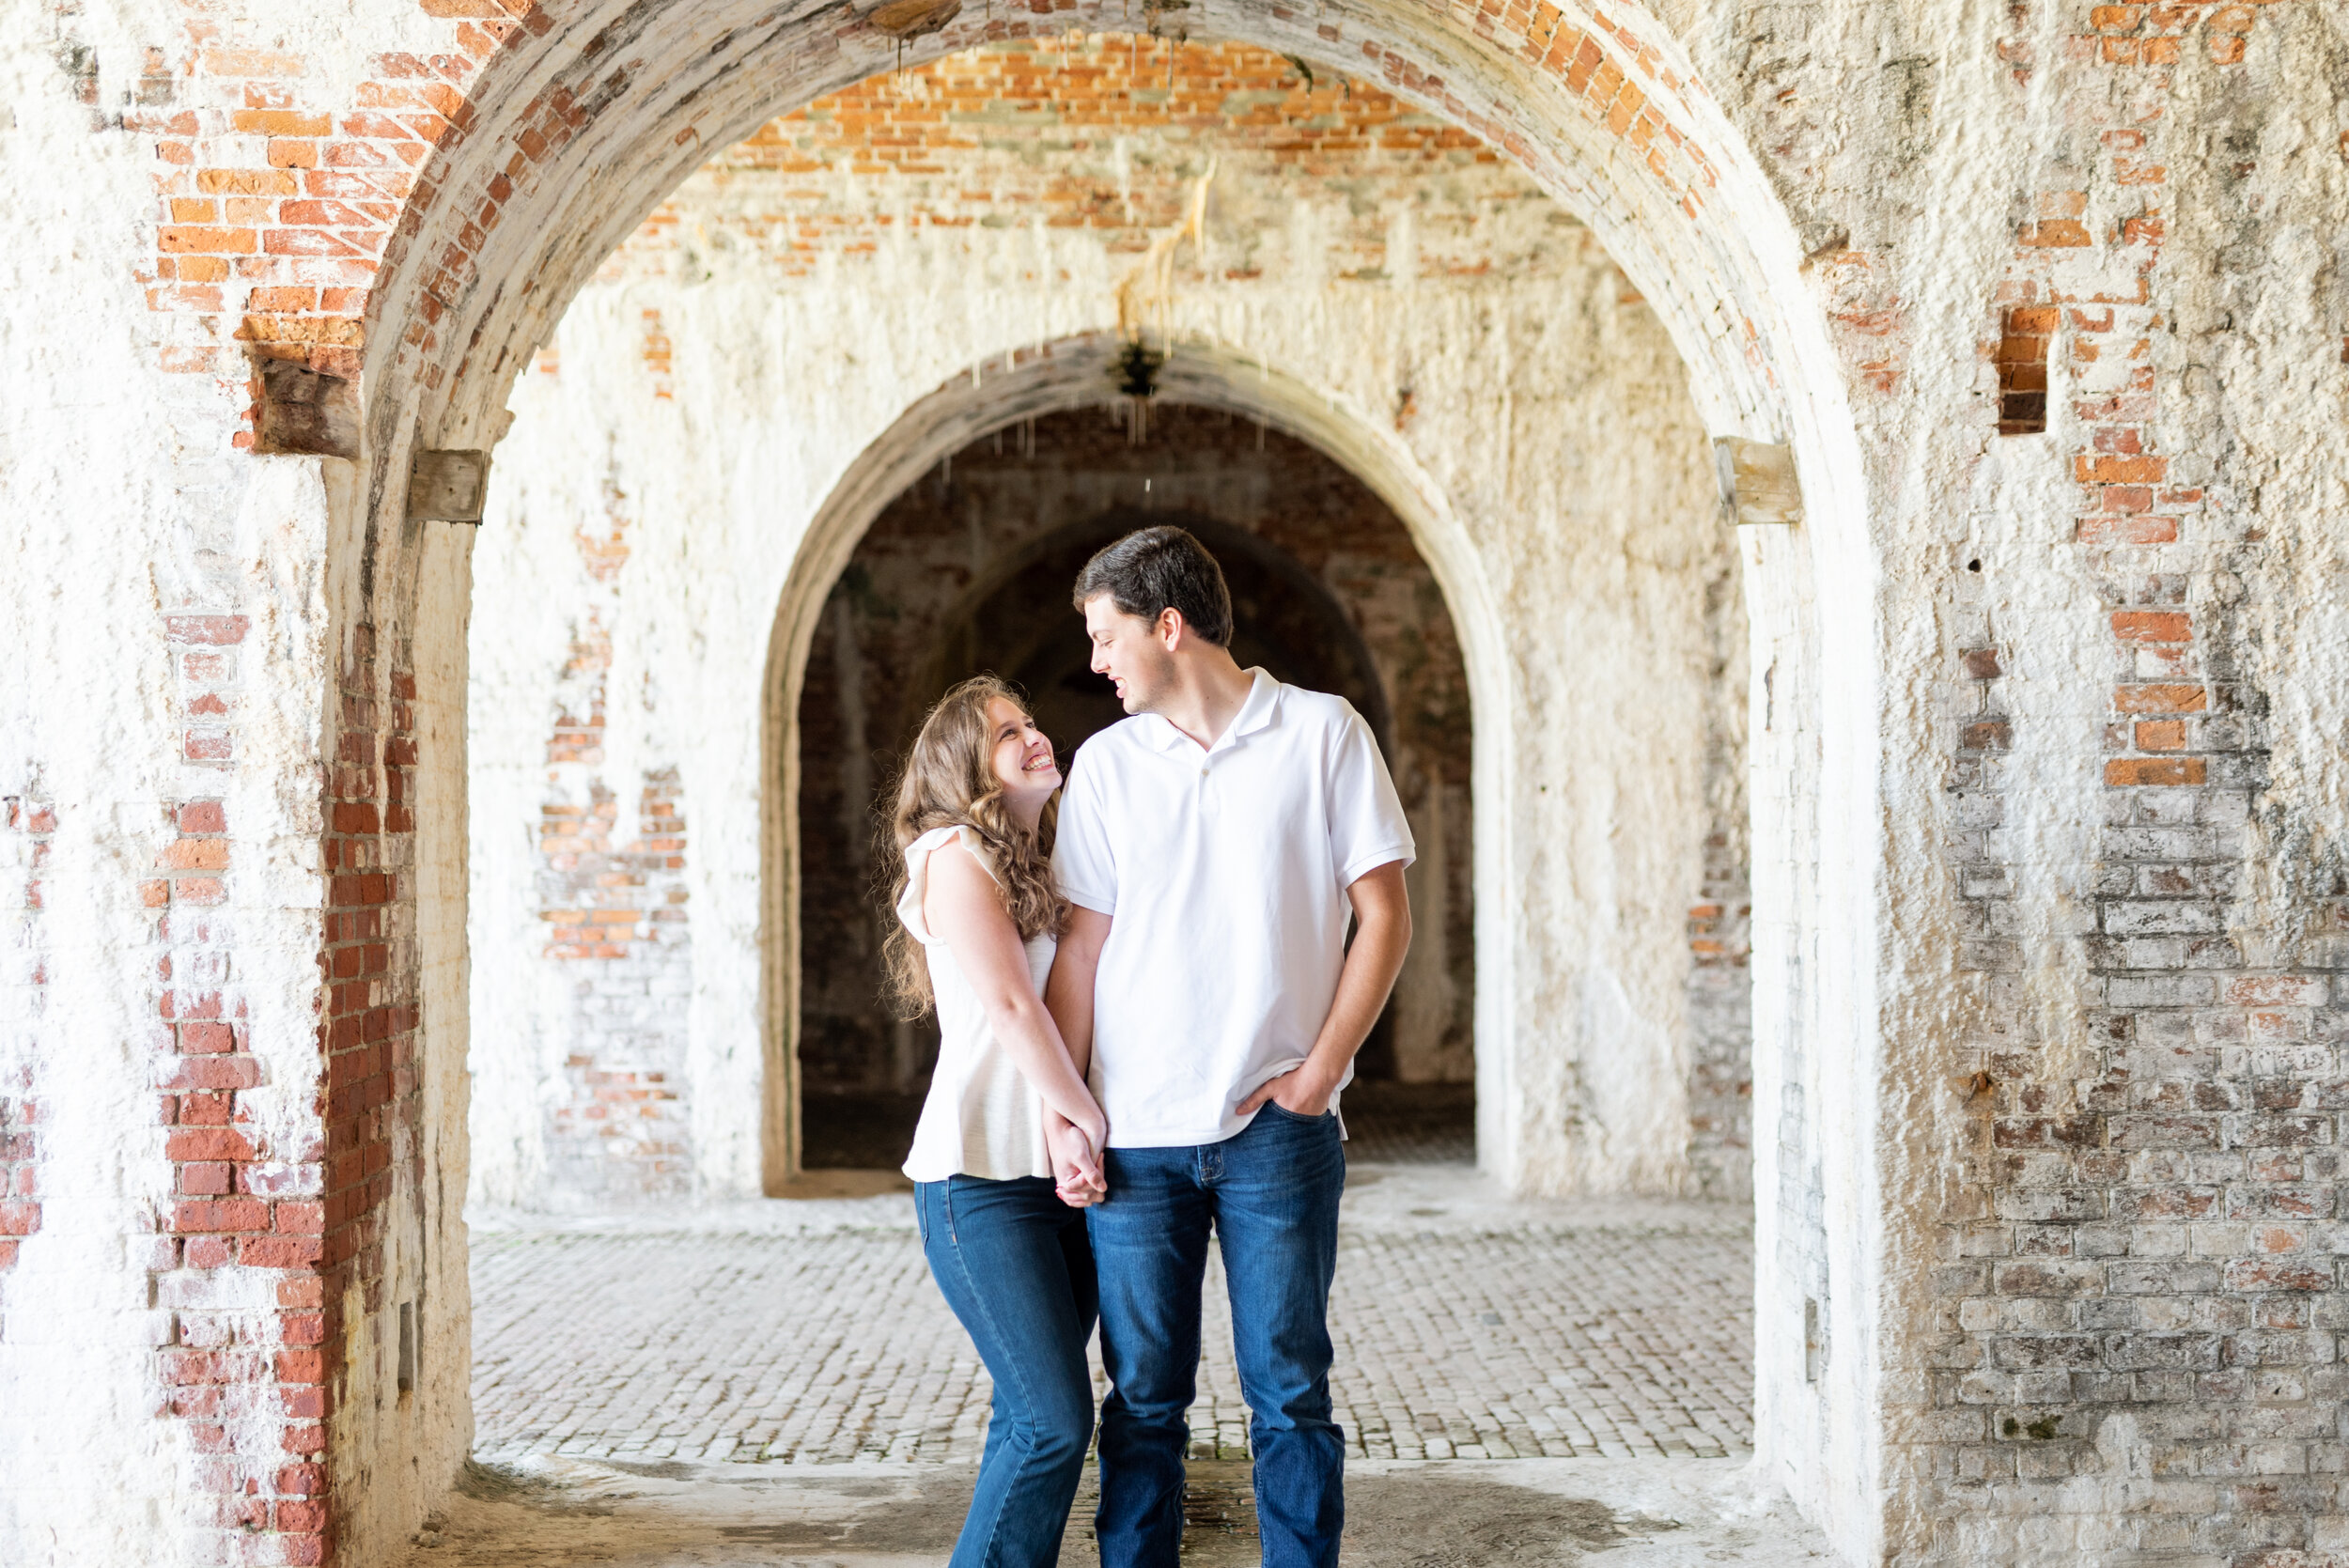 Fort Morgan Historic Site Engagement Photoshoot Photographed by Kristen Marcus Photography